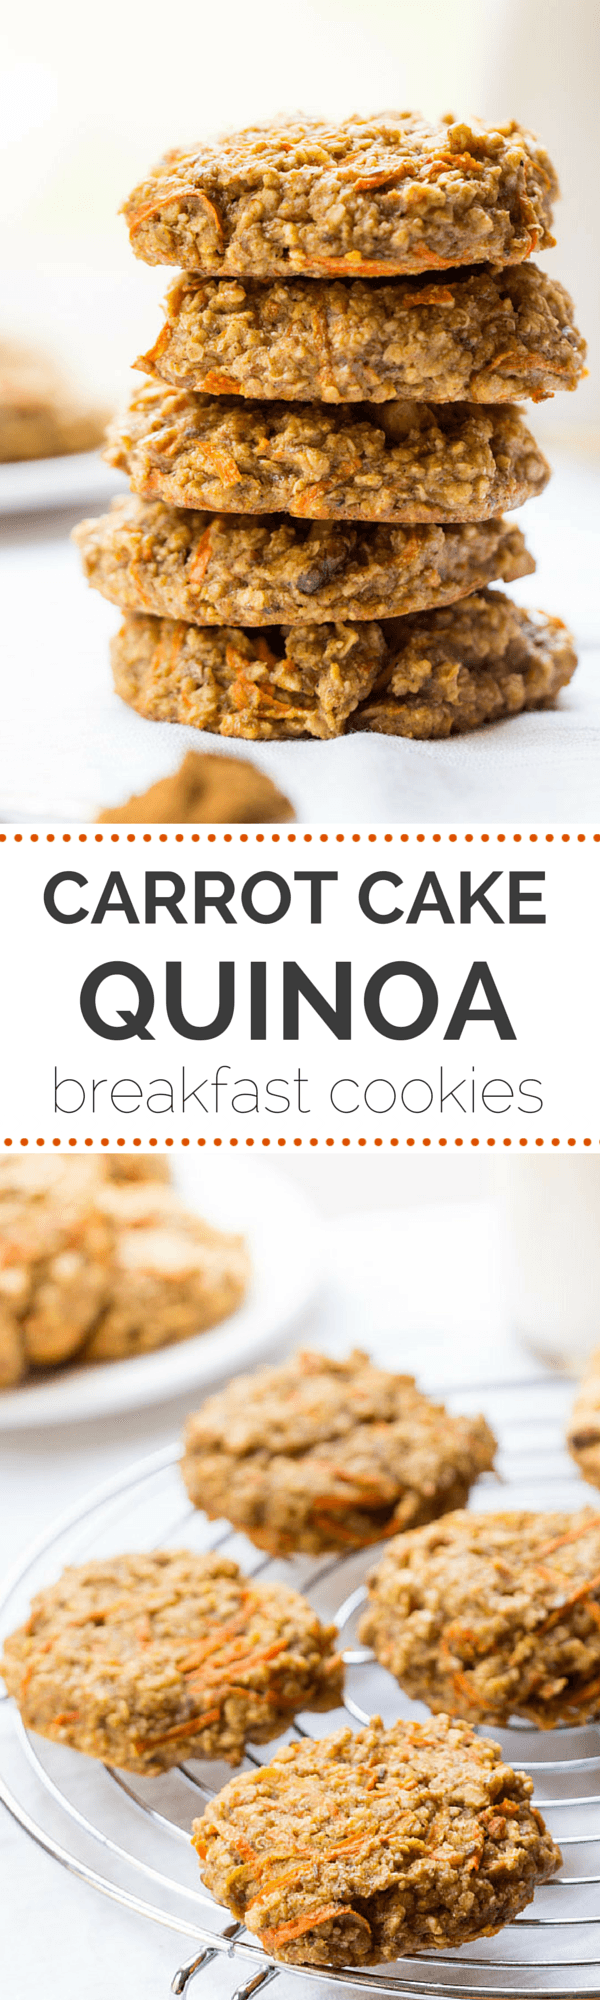 These AMAZING quinoa breakfast cookies taste just like carrot cake but are actually HEALTHY | gluten-free + vegan | recipe on simplyquinoa.com